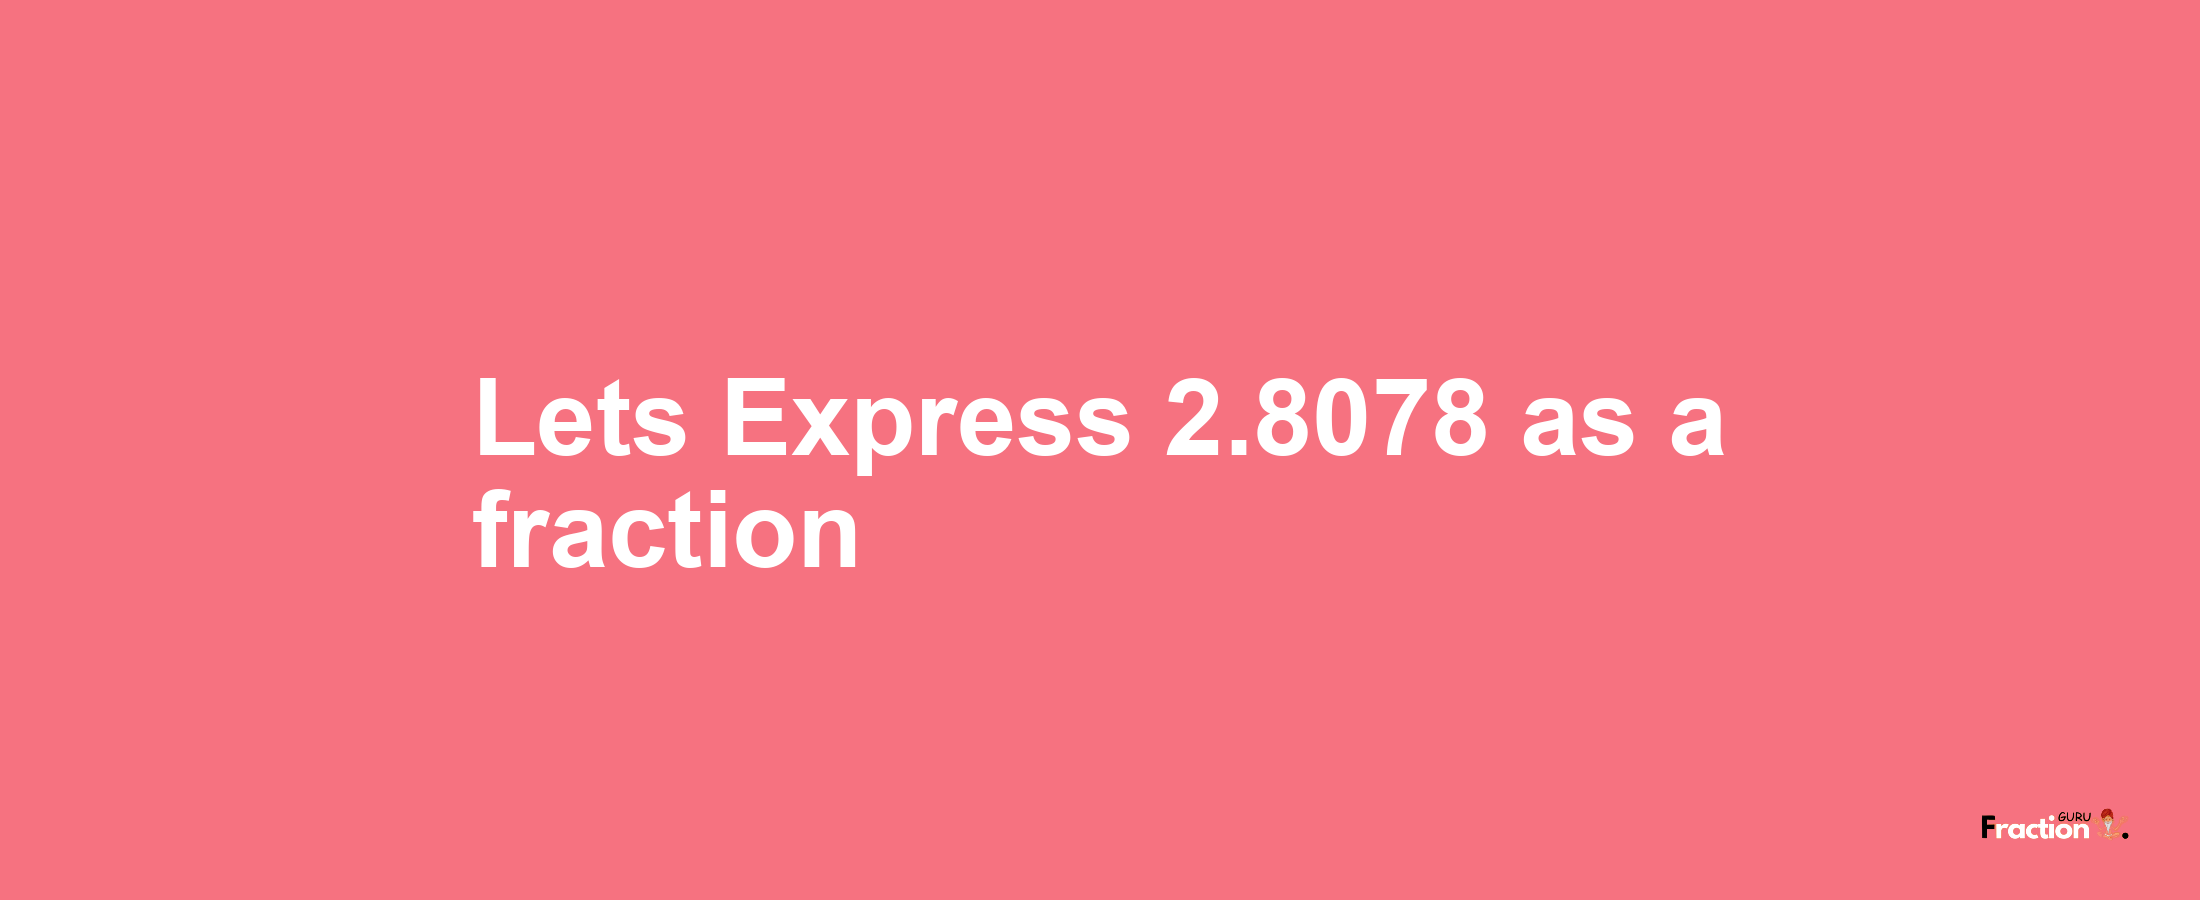 Lets Express 2.8078 as afraction